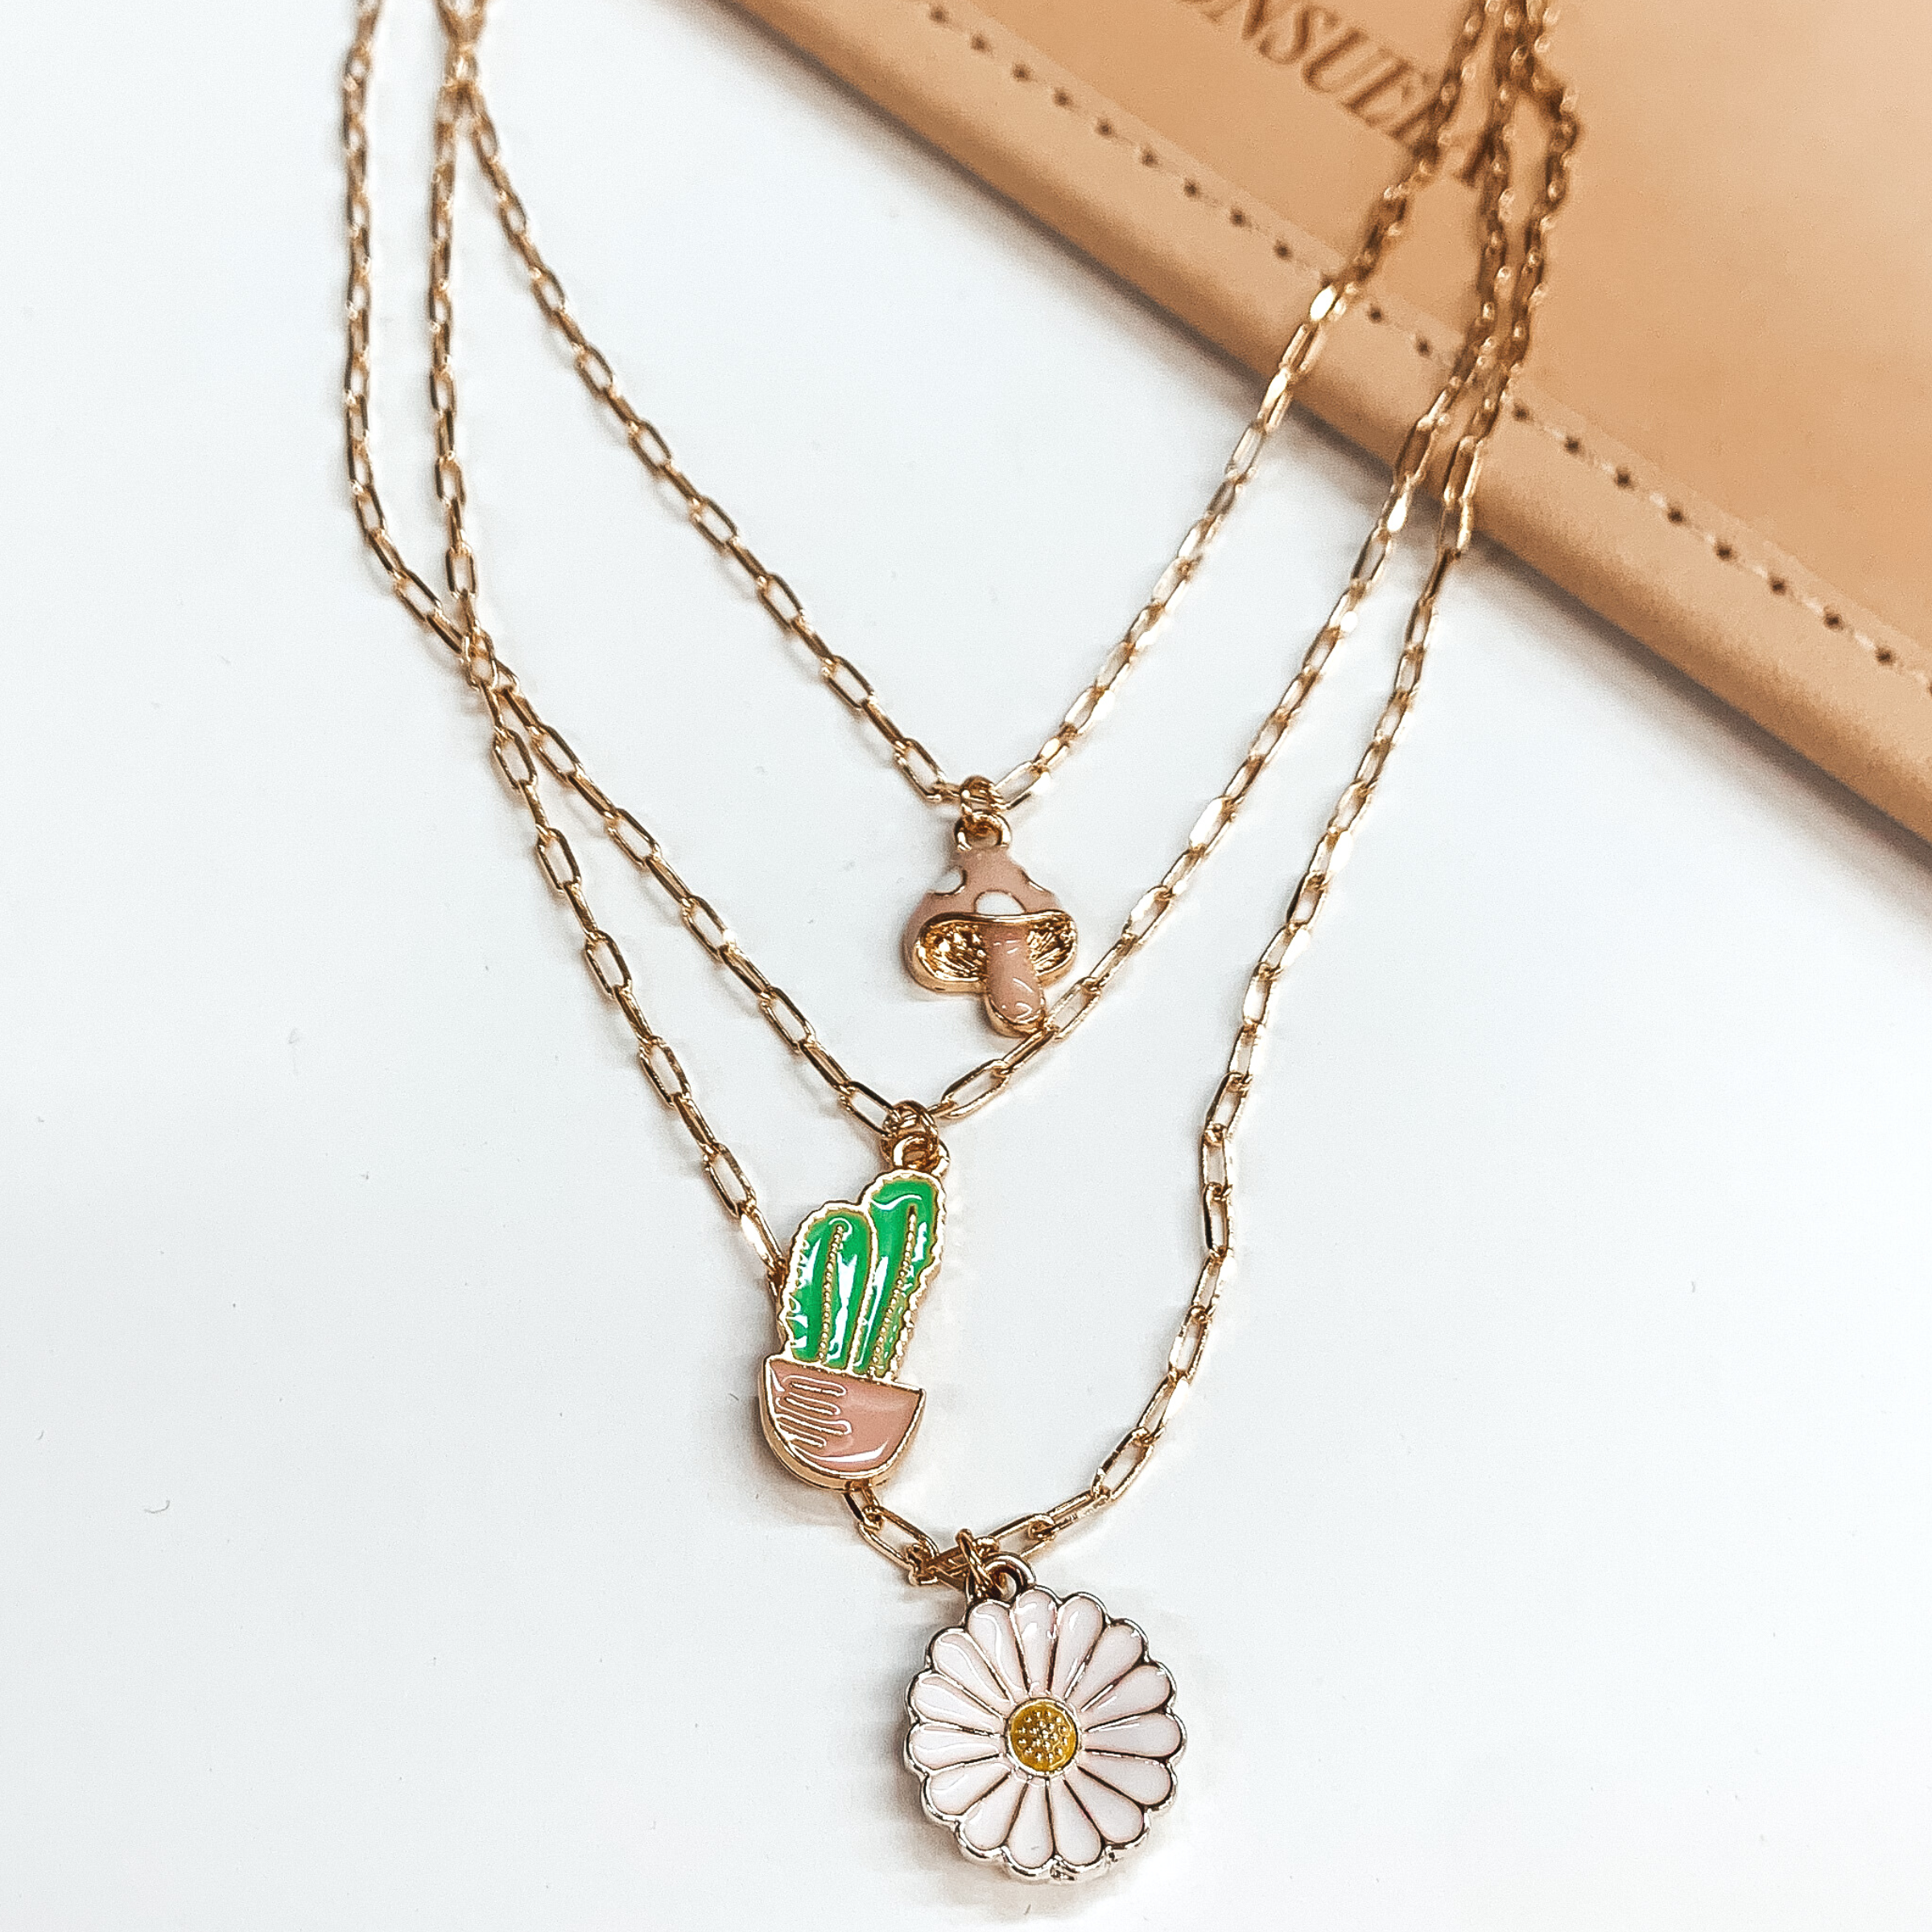 Three stranded gold chain necklace. Each strand has an individual charm in colors white, green, white, and pale pink. These include, a mushroom charm, a cactus in a pot charm, and a white flower charm. This necklace is pictured partially on a tan bag on a white background. 